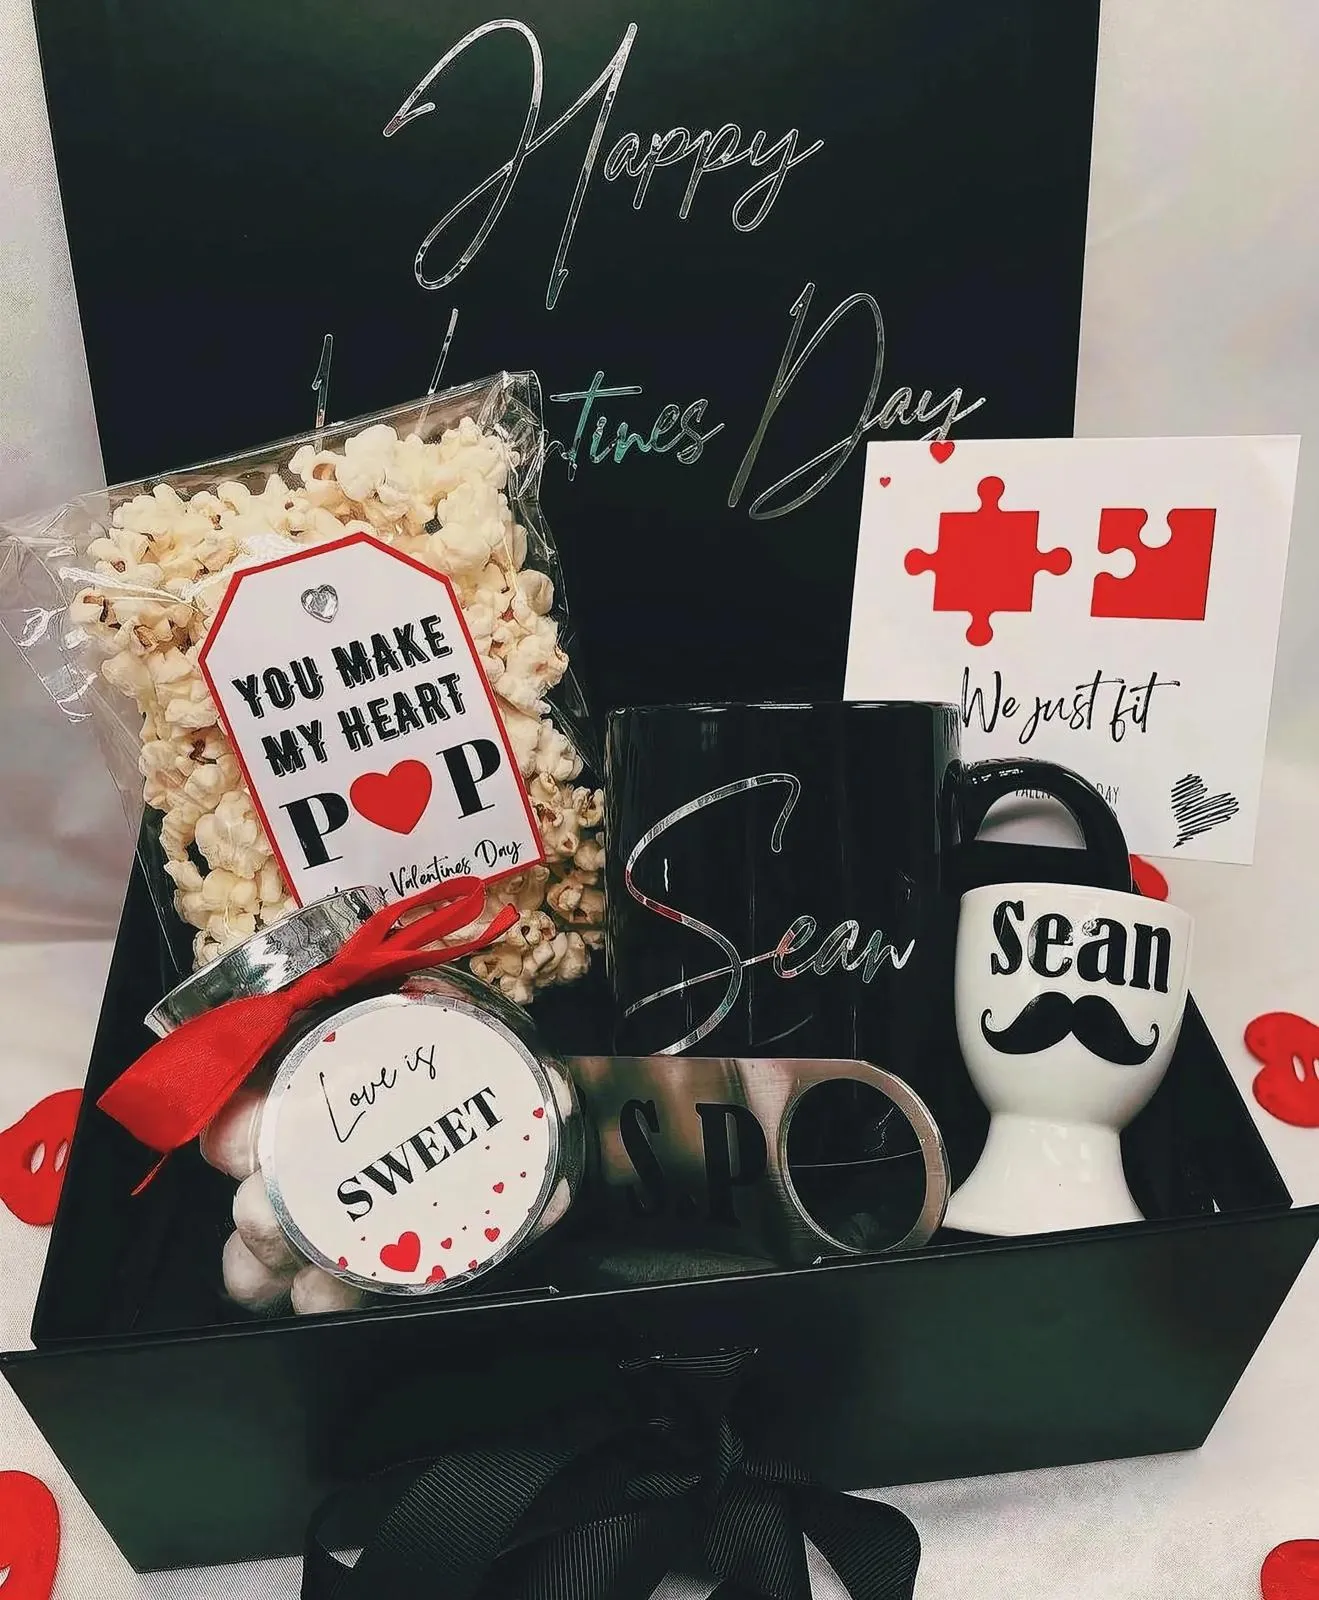 Various gift boxes and objects with a Valentine's Day theme.